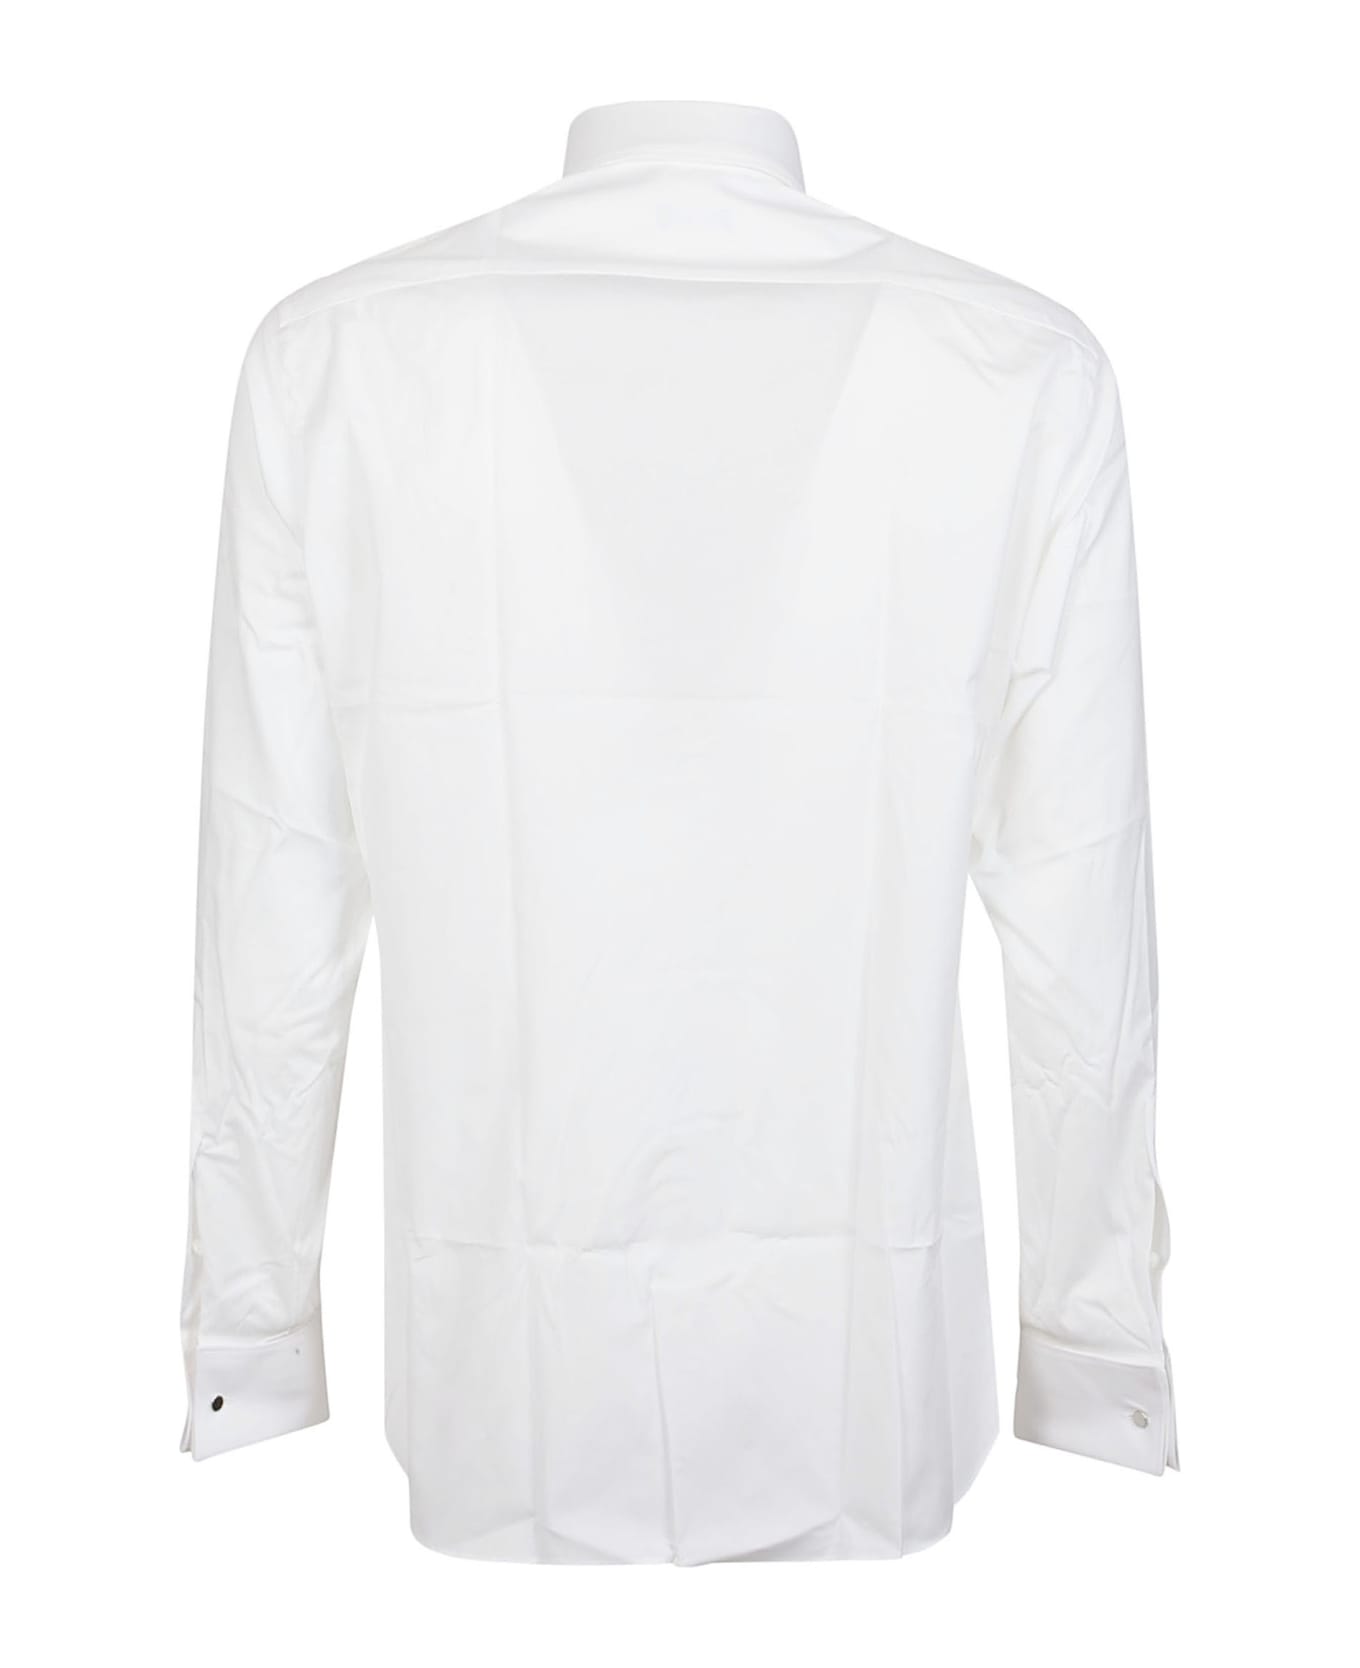 Zegna Lux Tailoring Long Sleeve Shirt - Bianco シャツ